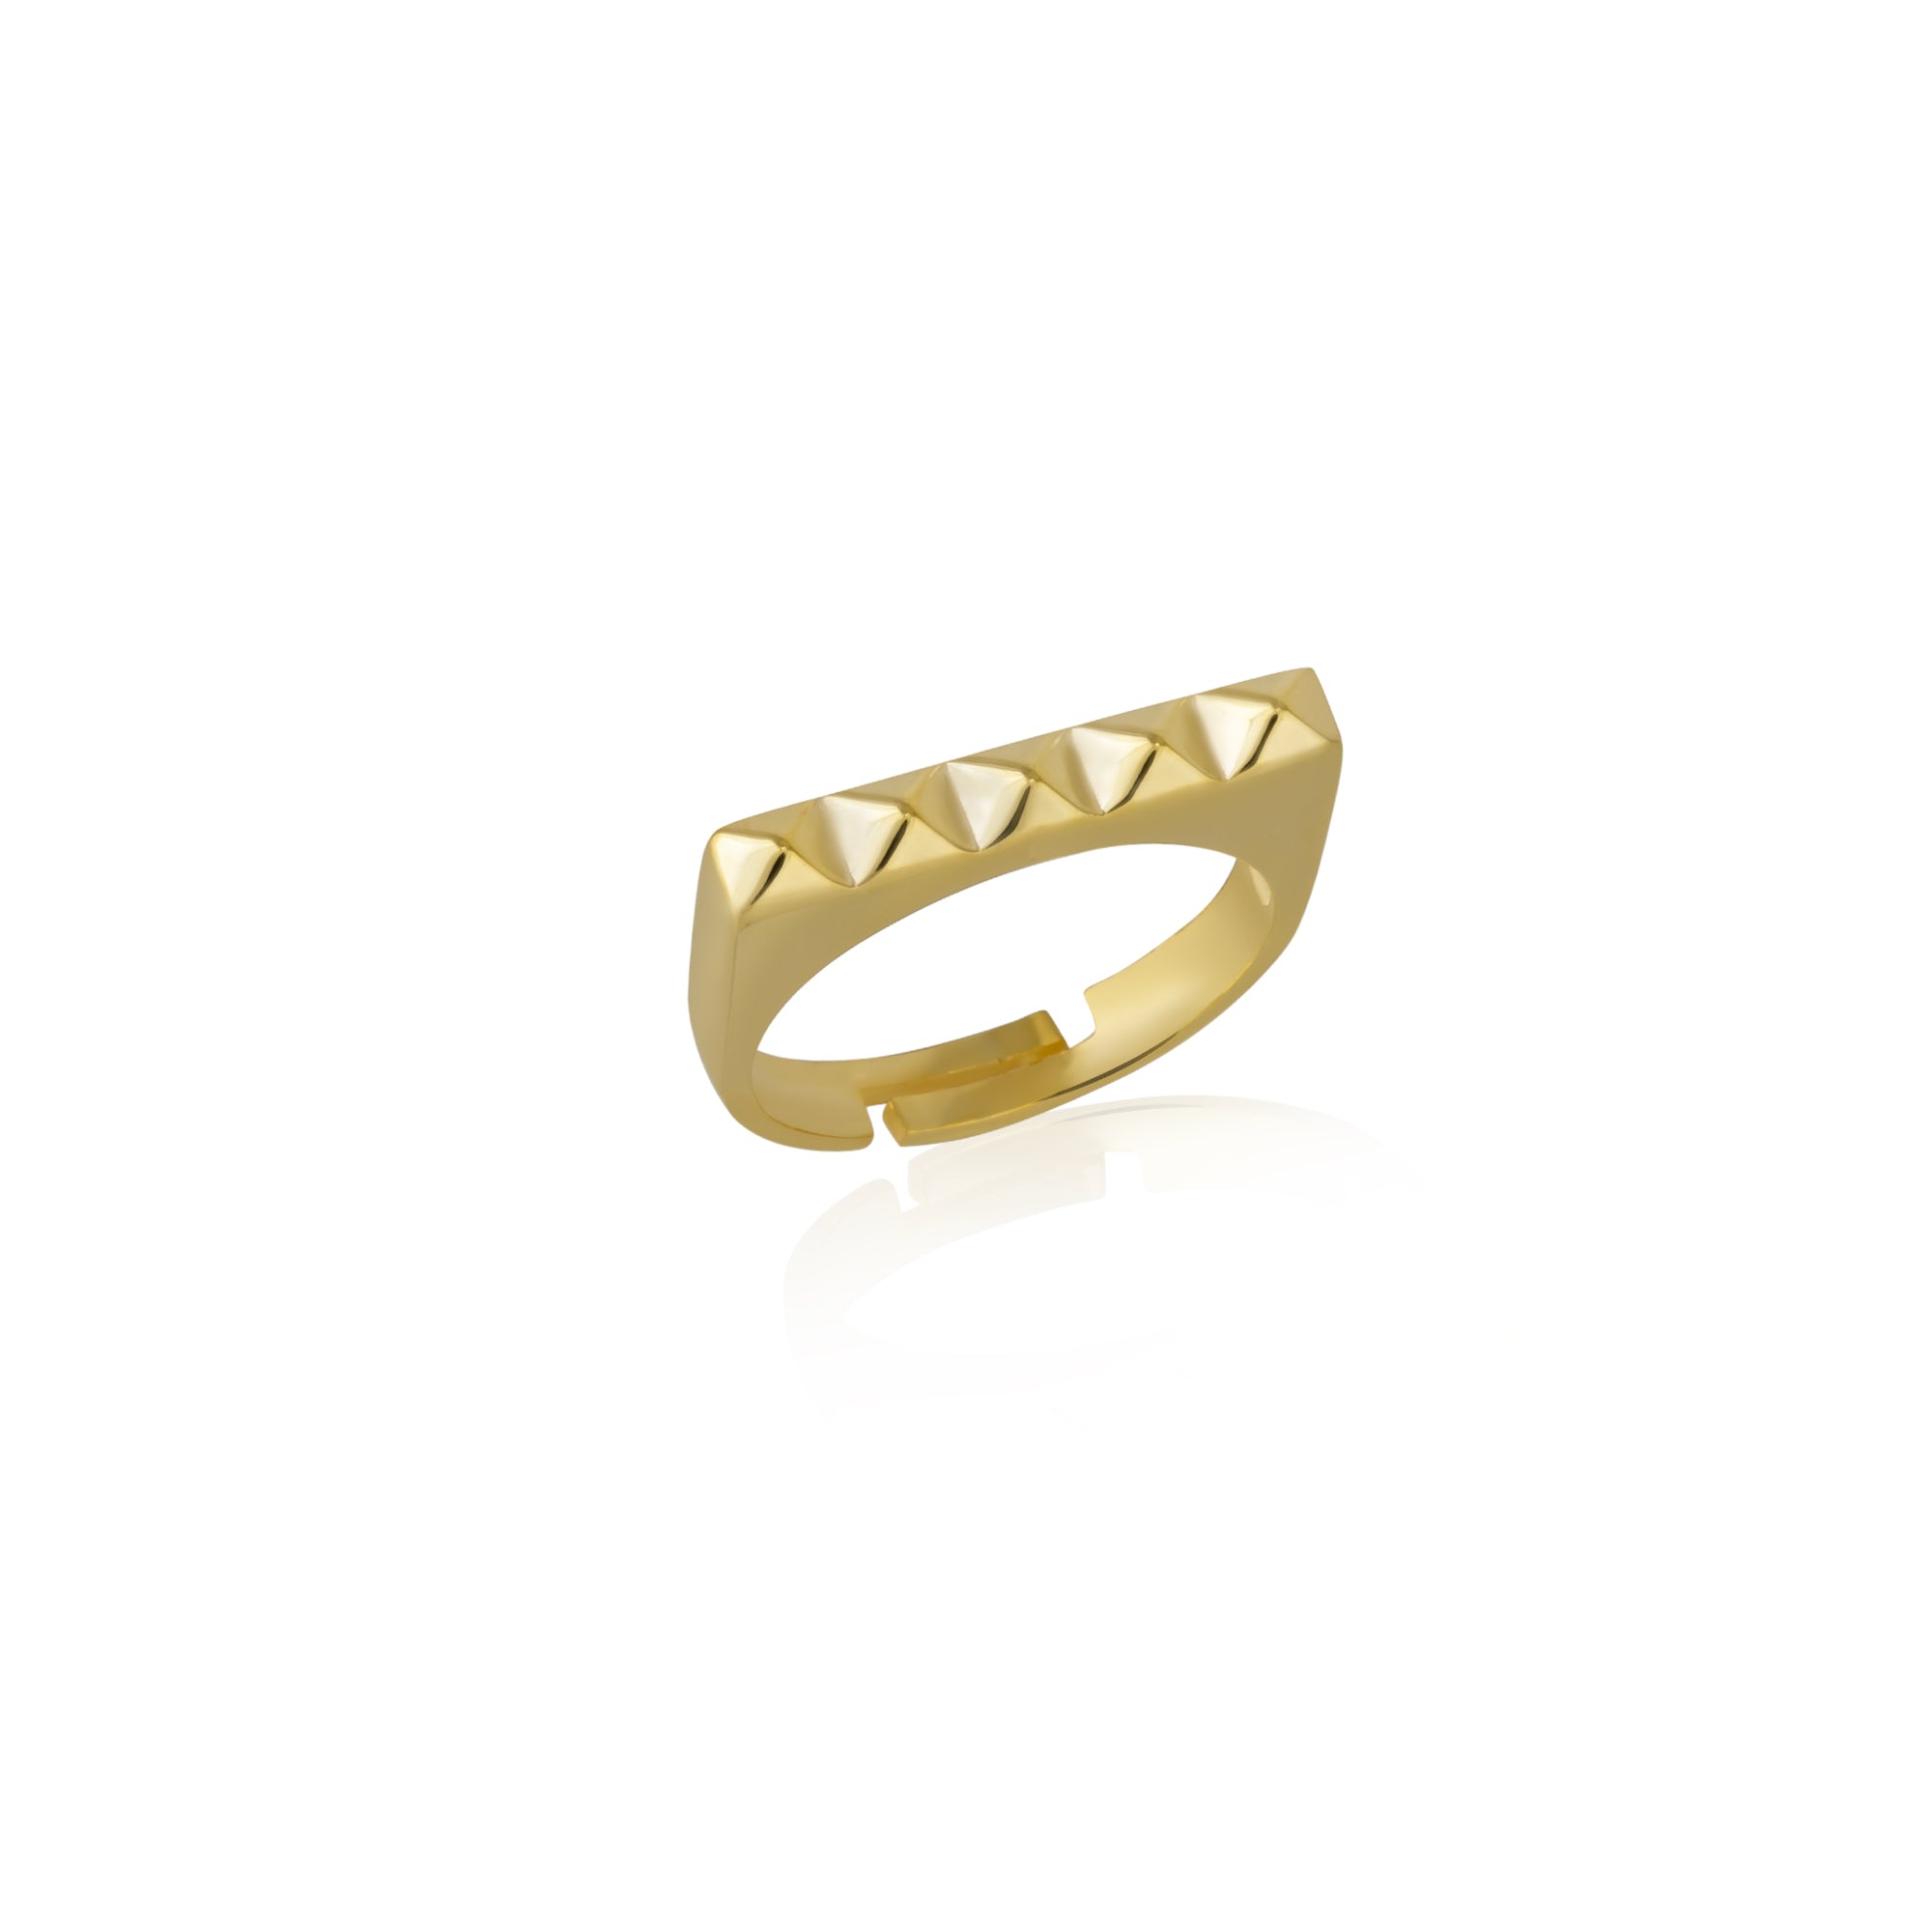 Spero London Women's Gold Pyramid Adjustable Sterling Silver Ring